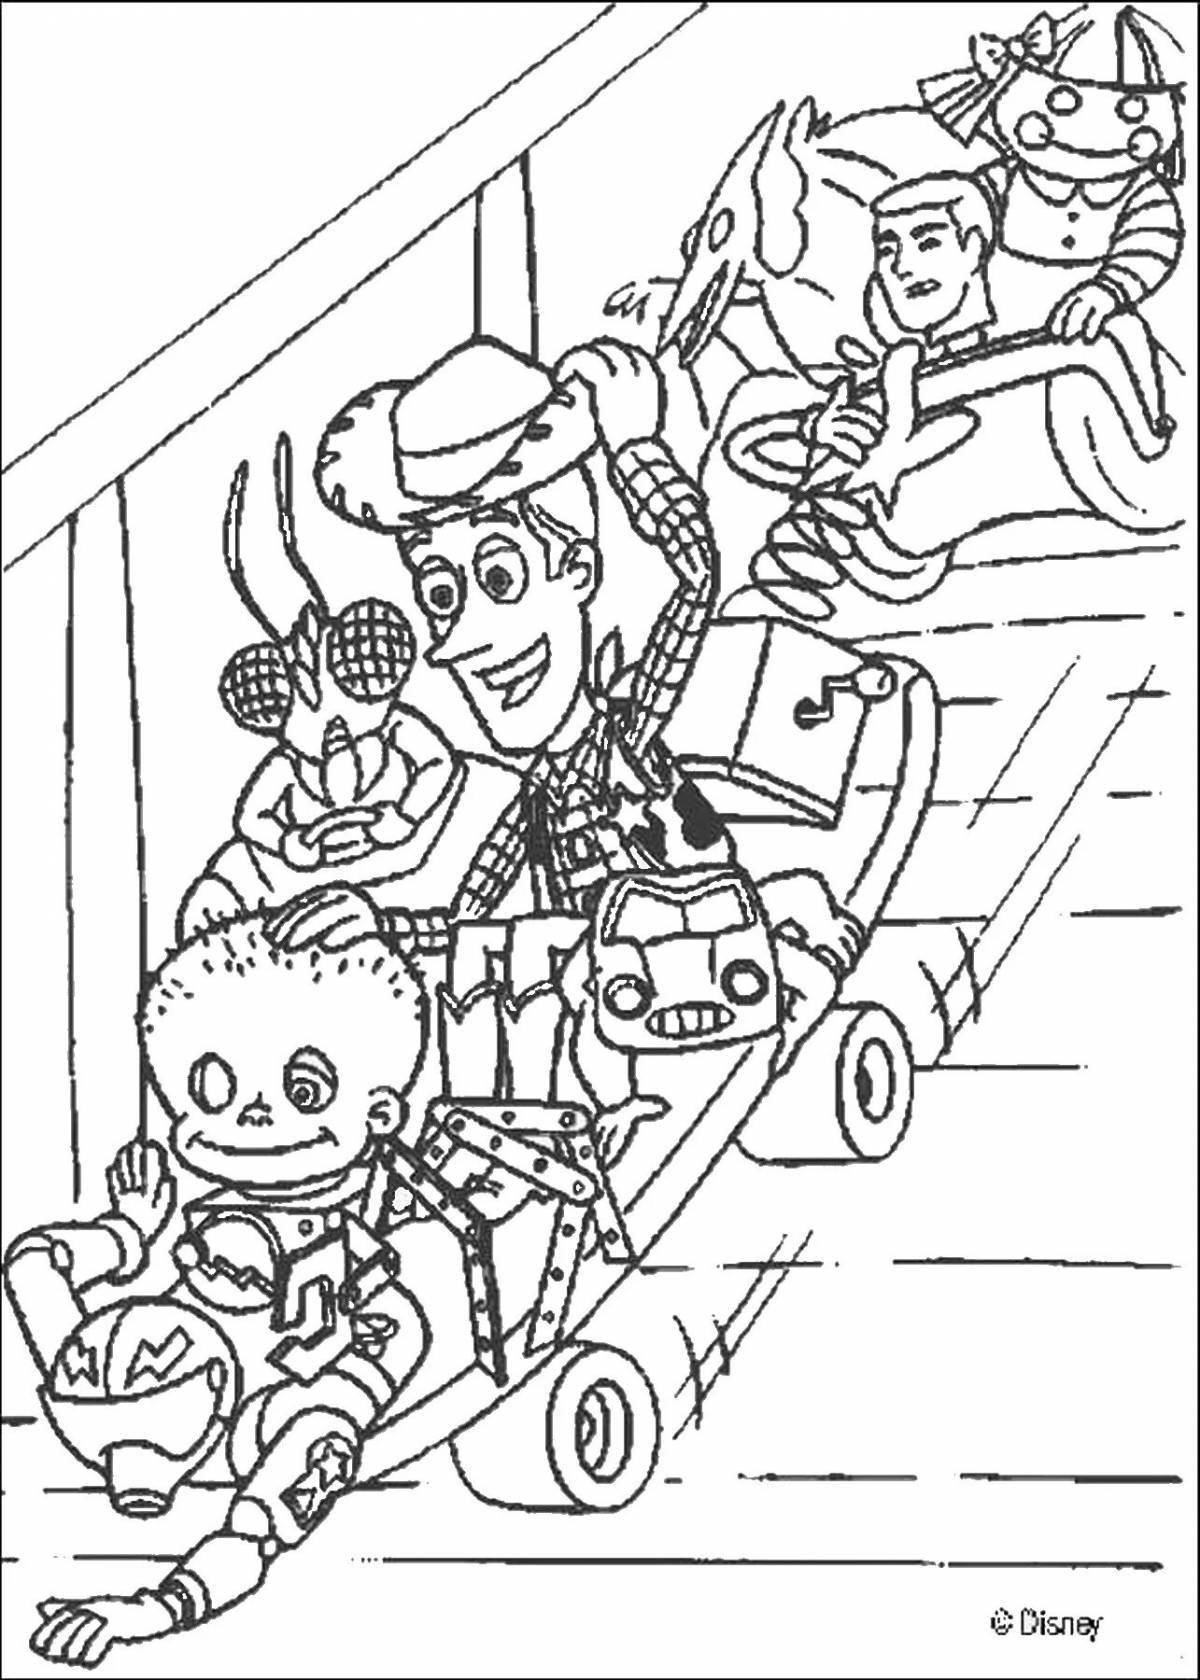 Amazing killy willy coloring page